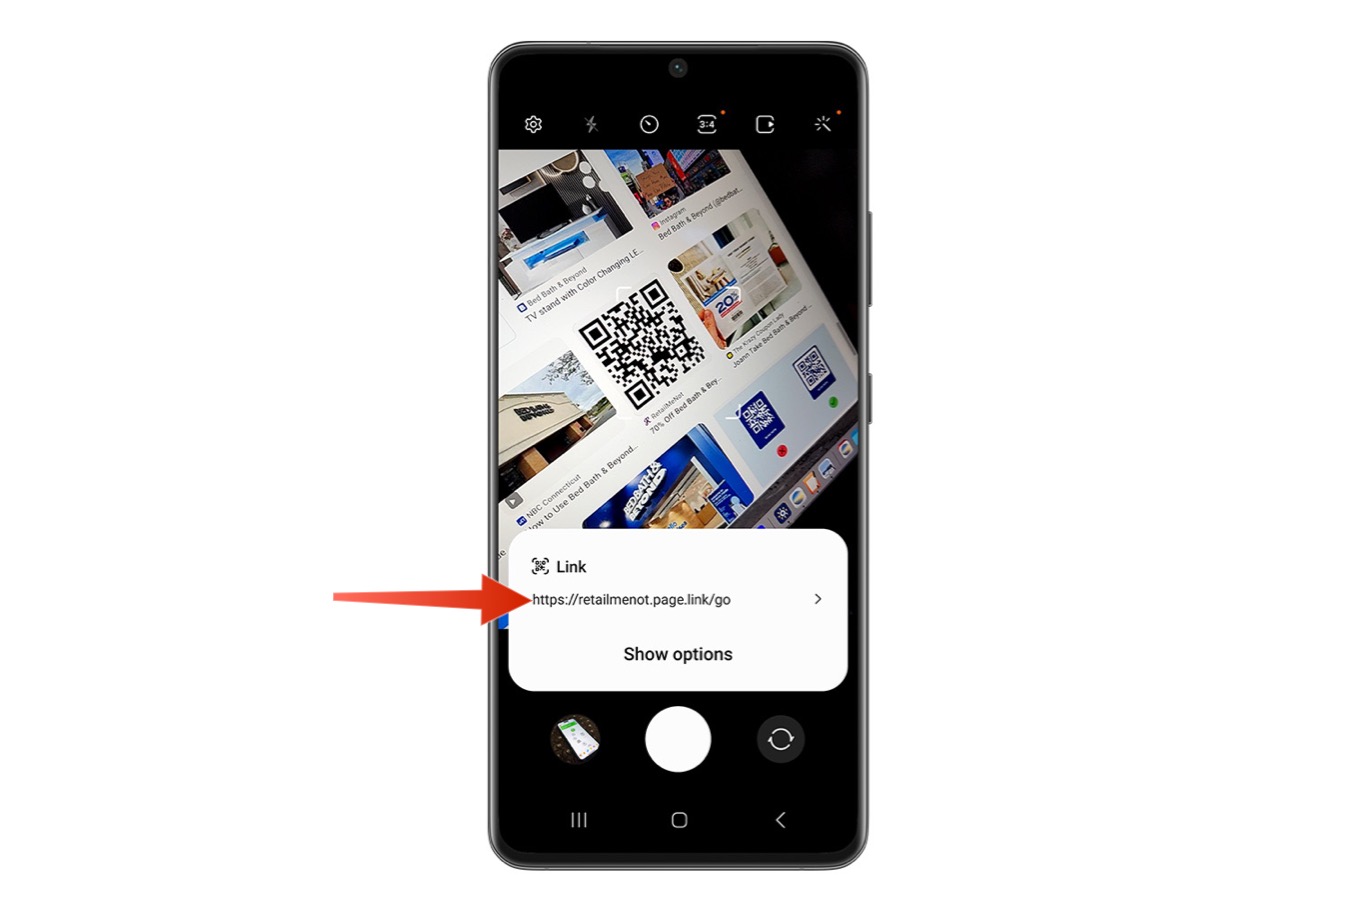 How to scan a QR code with your iPhone or Android phone without an app